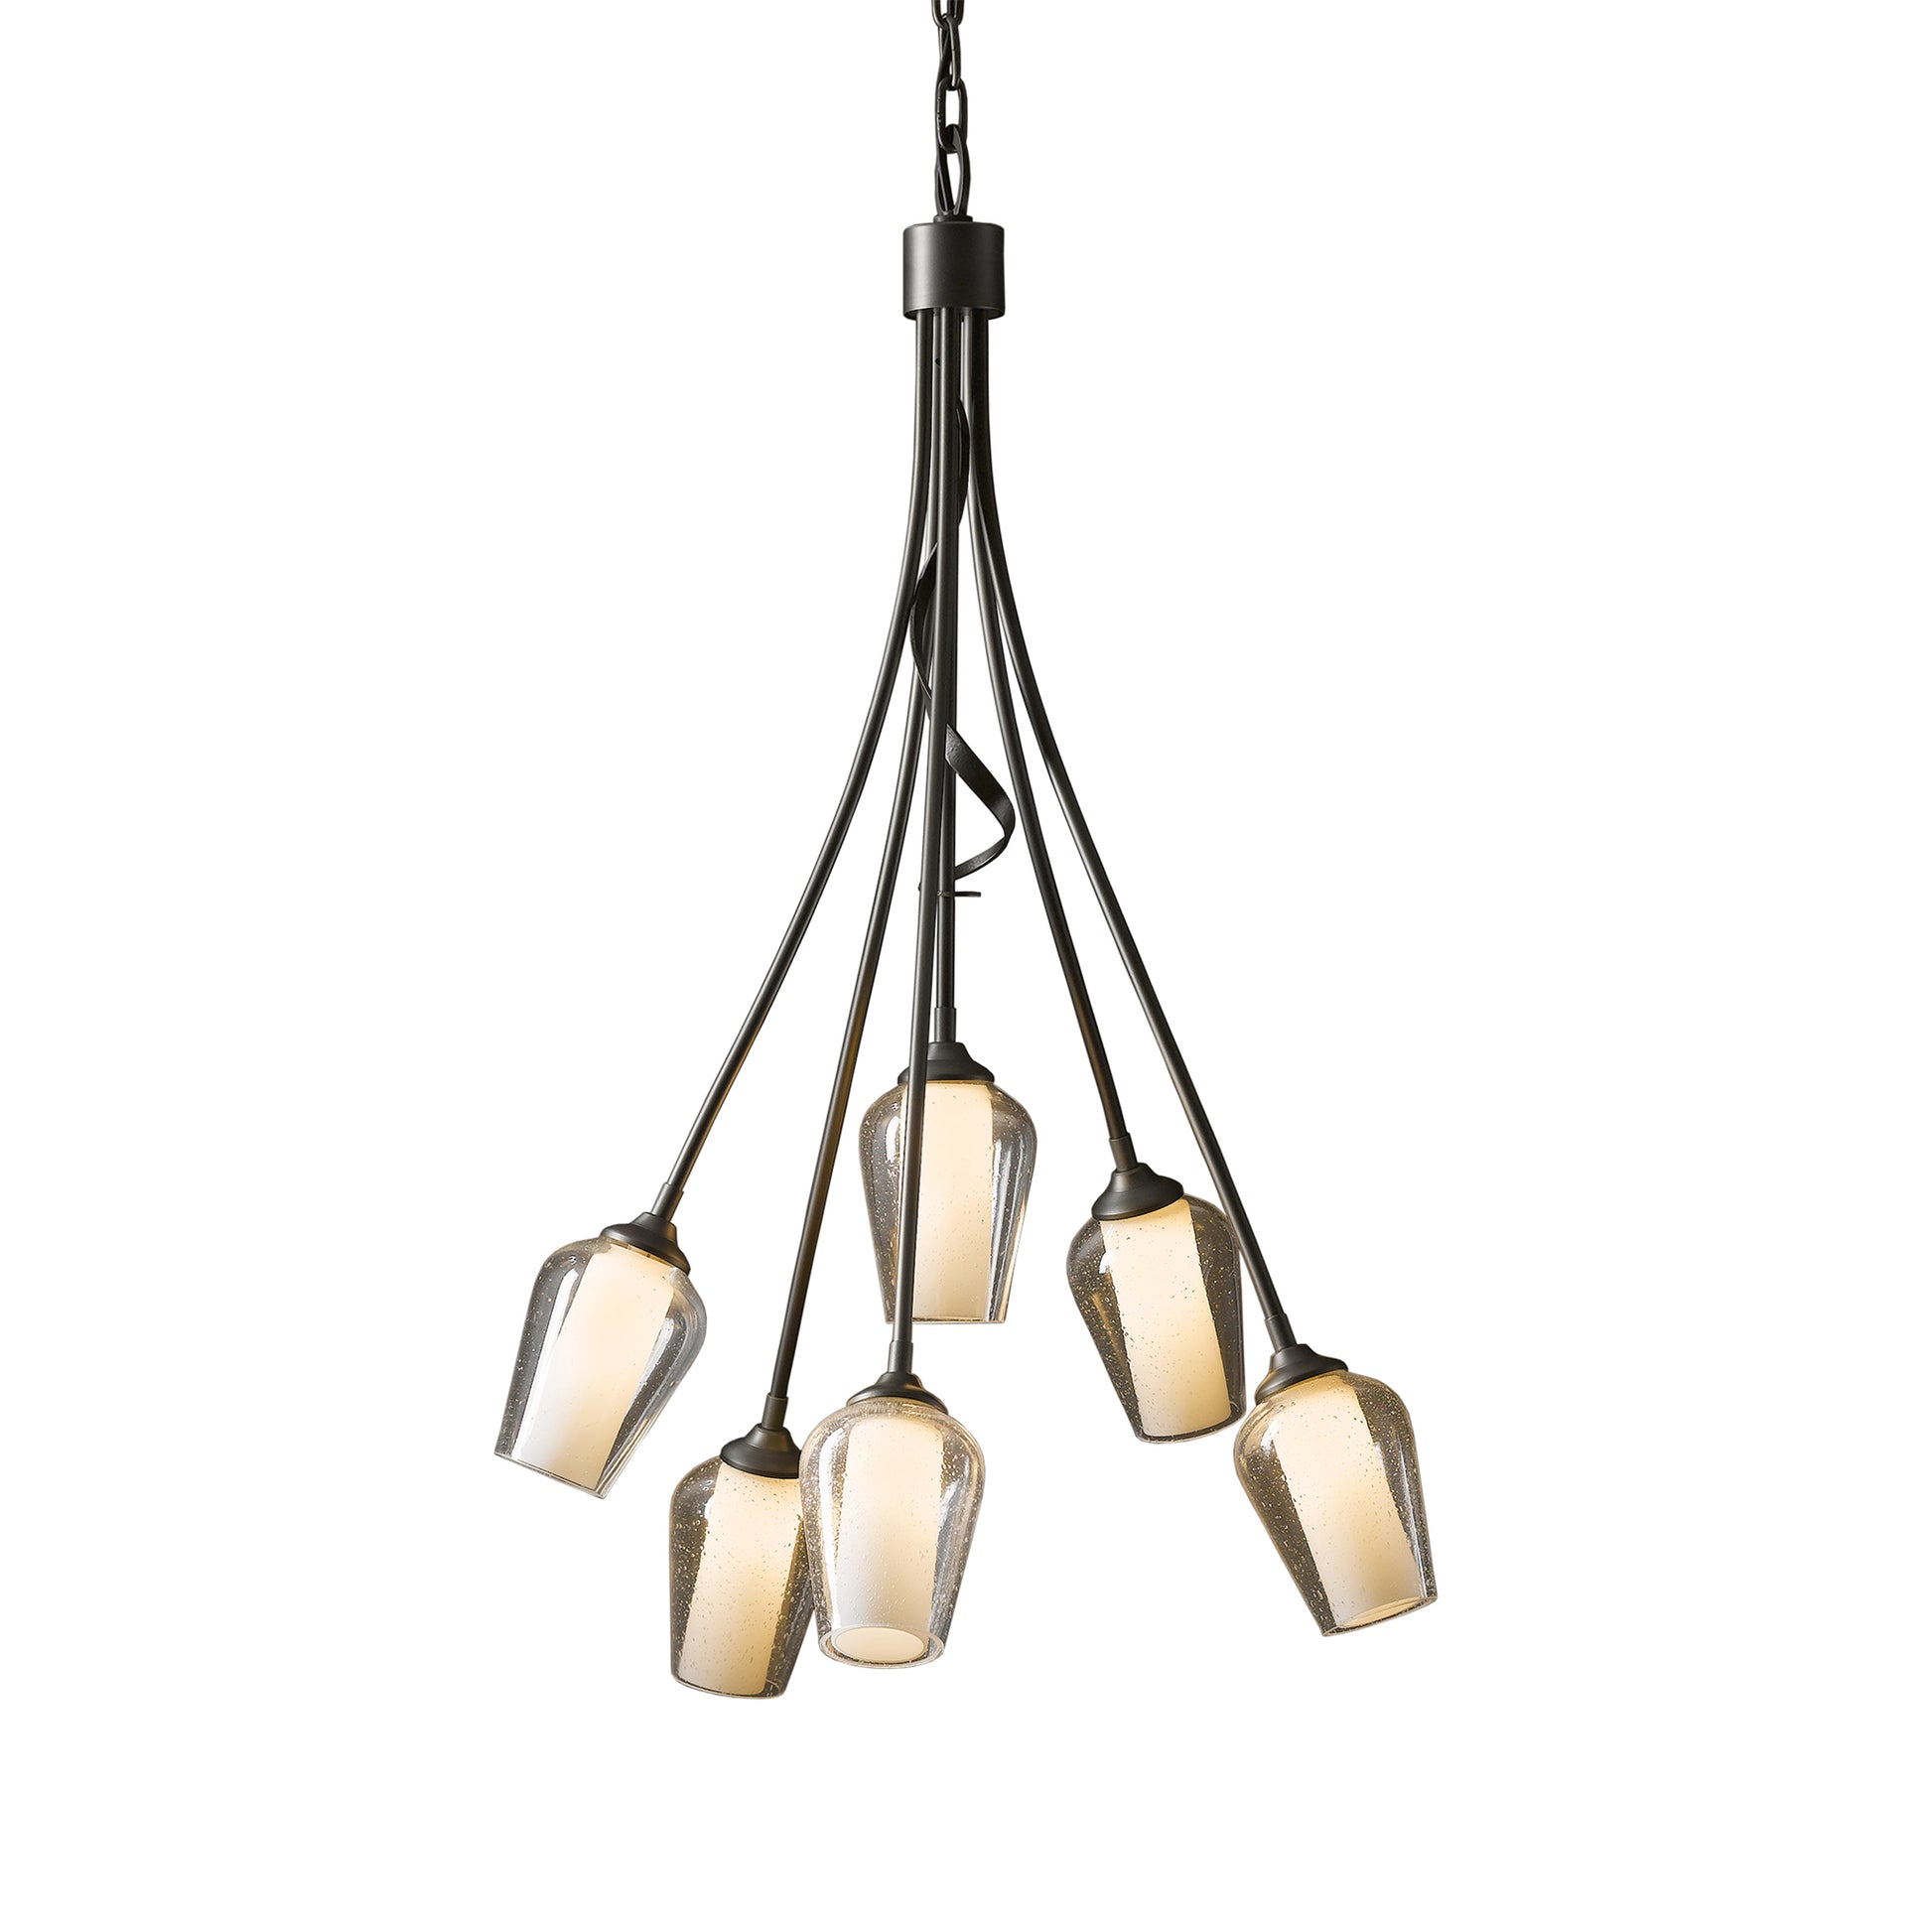 A Flora 6-Arm Chandelier by Hubbardton Forge with glass shades.